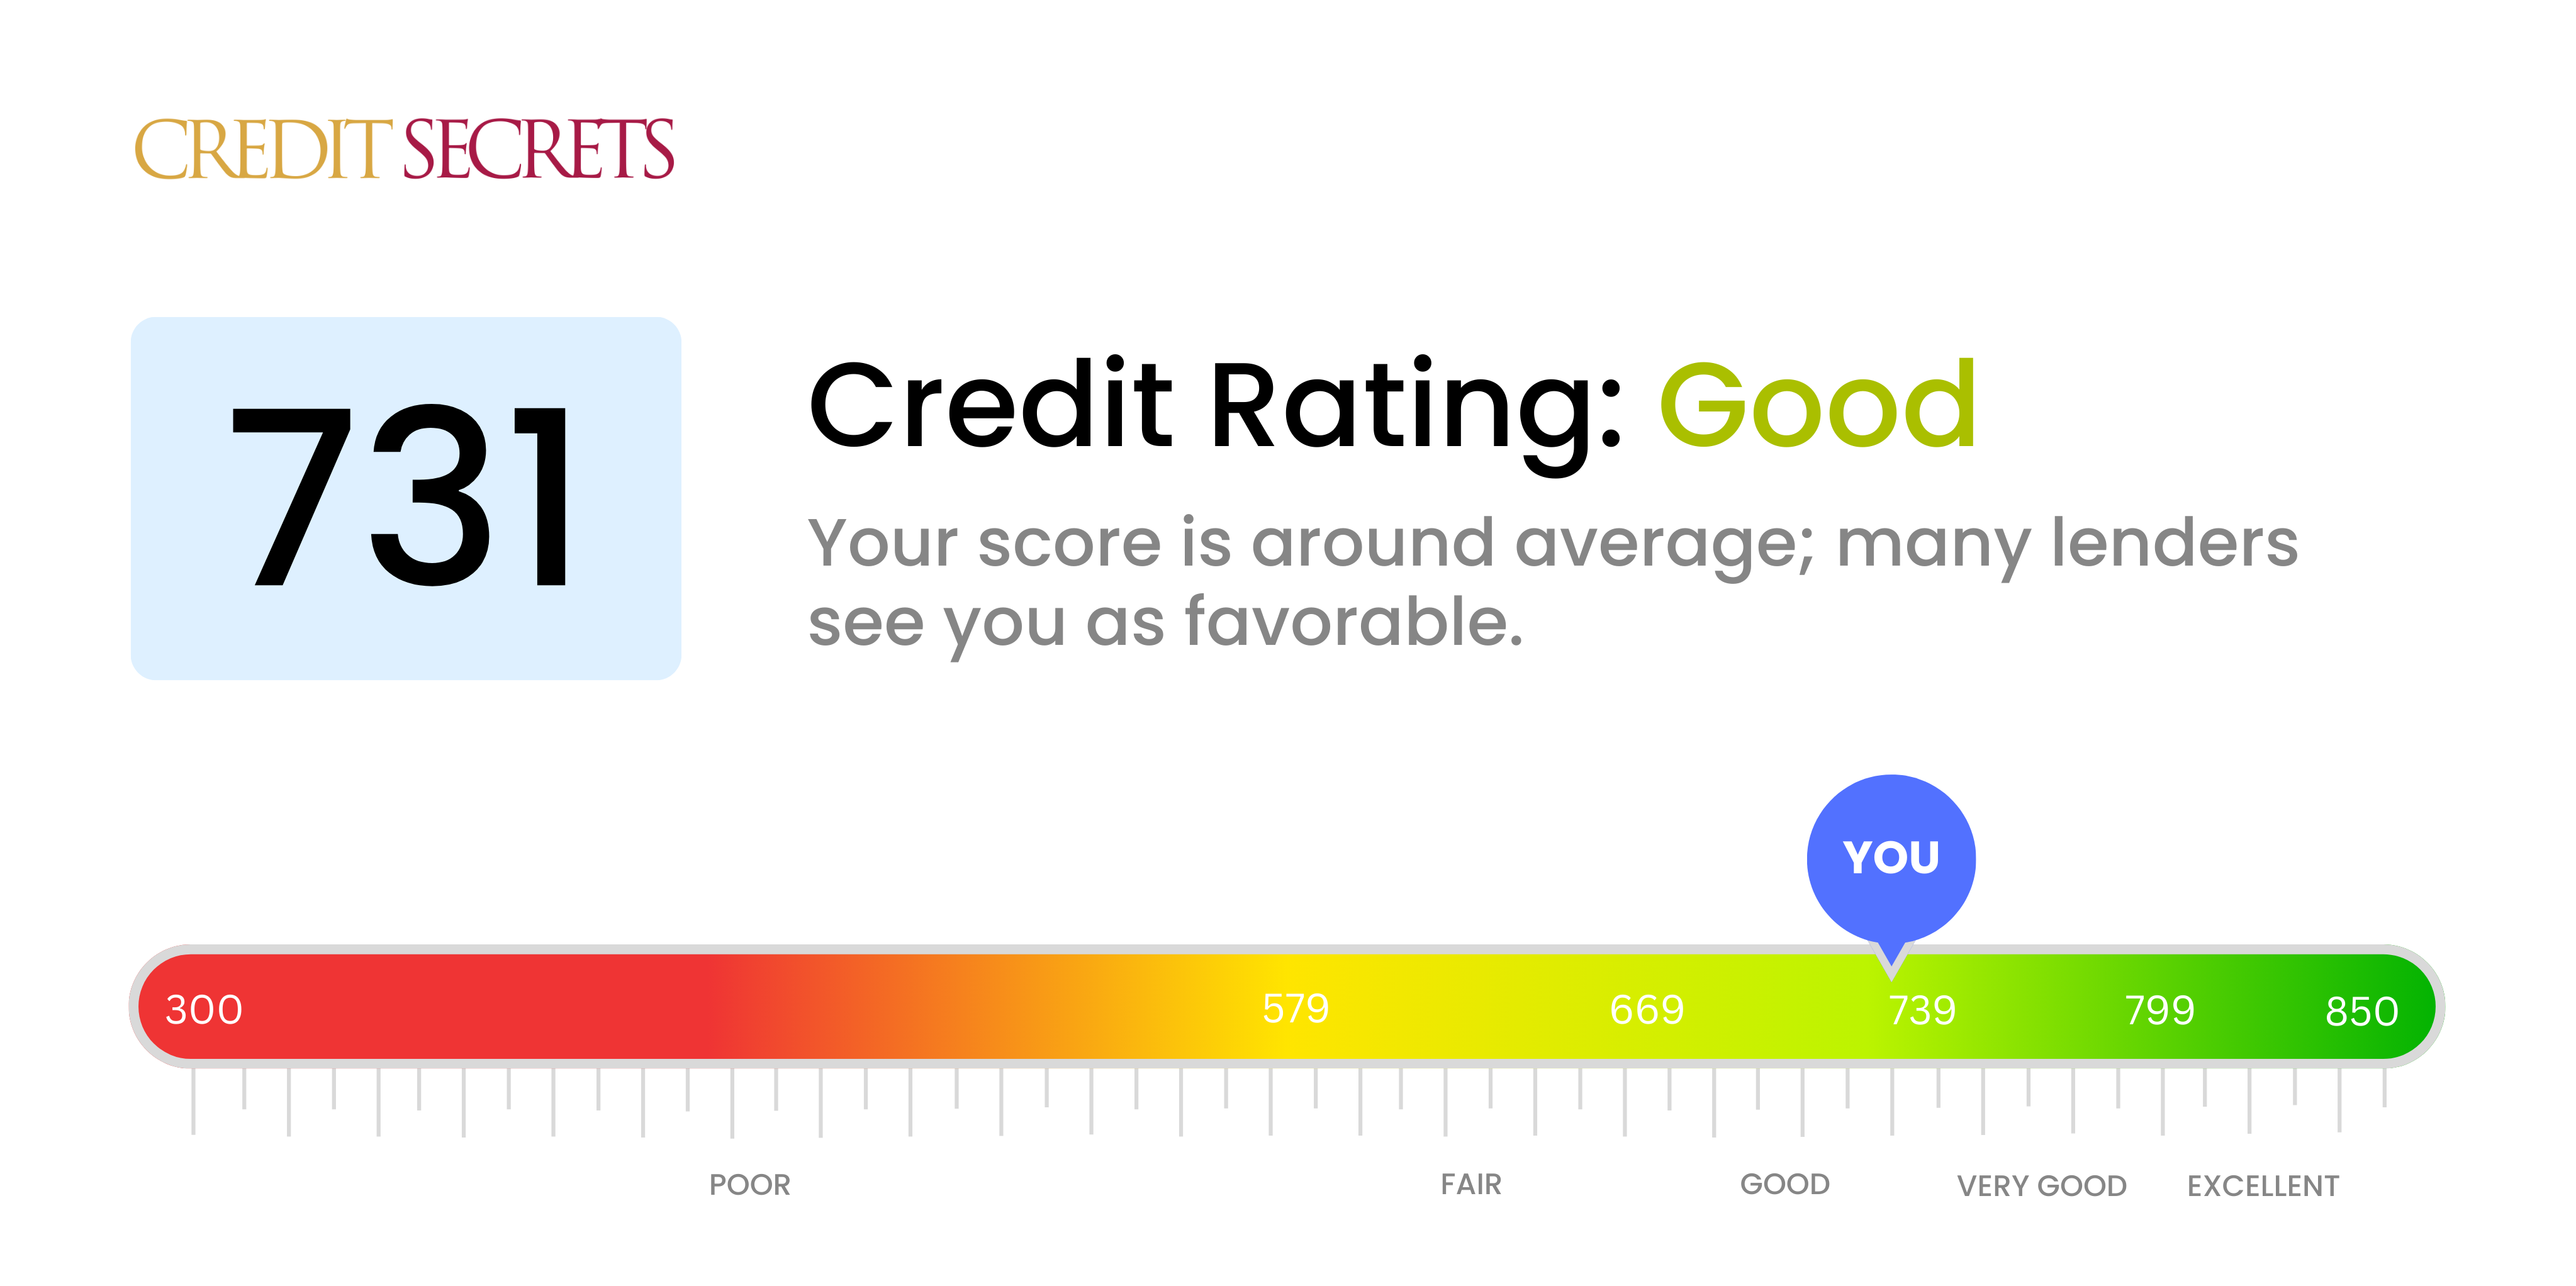 Is 731 a good credit score?